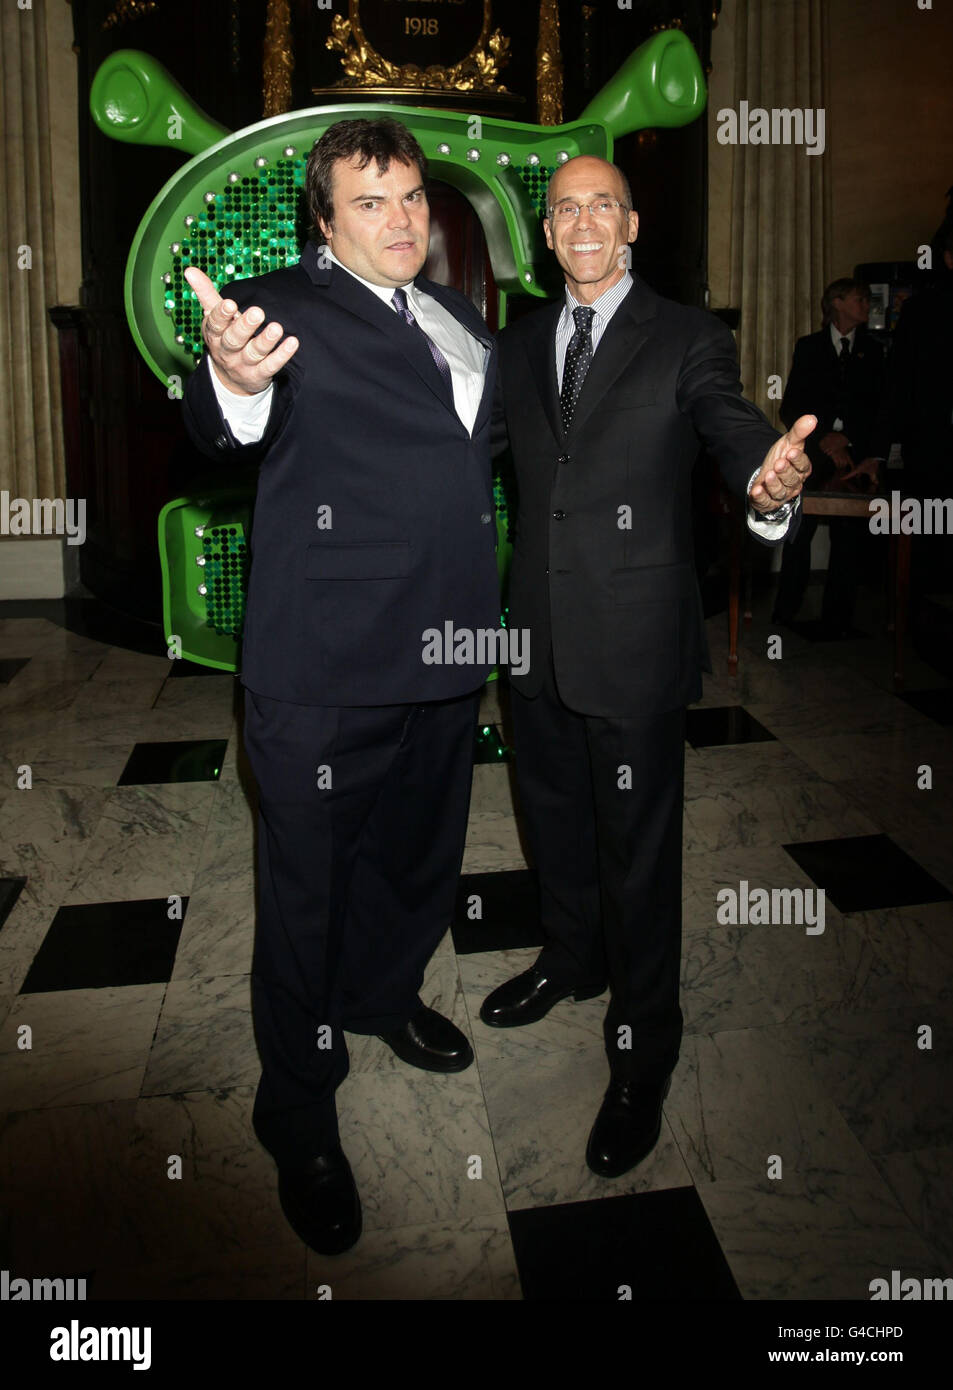 Jack Black (left) and Jeffrey Katzenberg, CEO of DreamWorks Animation arrive for a special performance of Shrek The Musical at the Theatre Royal in Drury Lane, London. Stock Photo